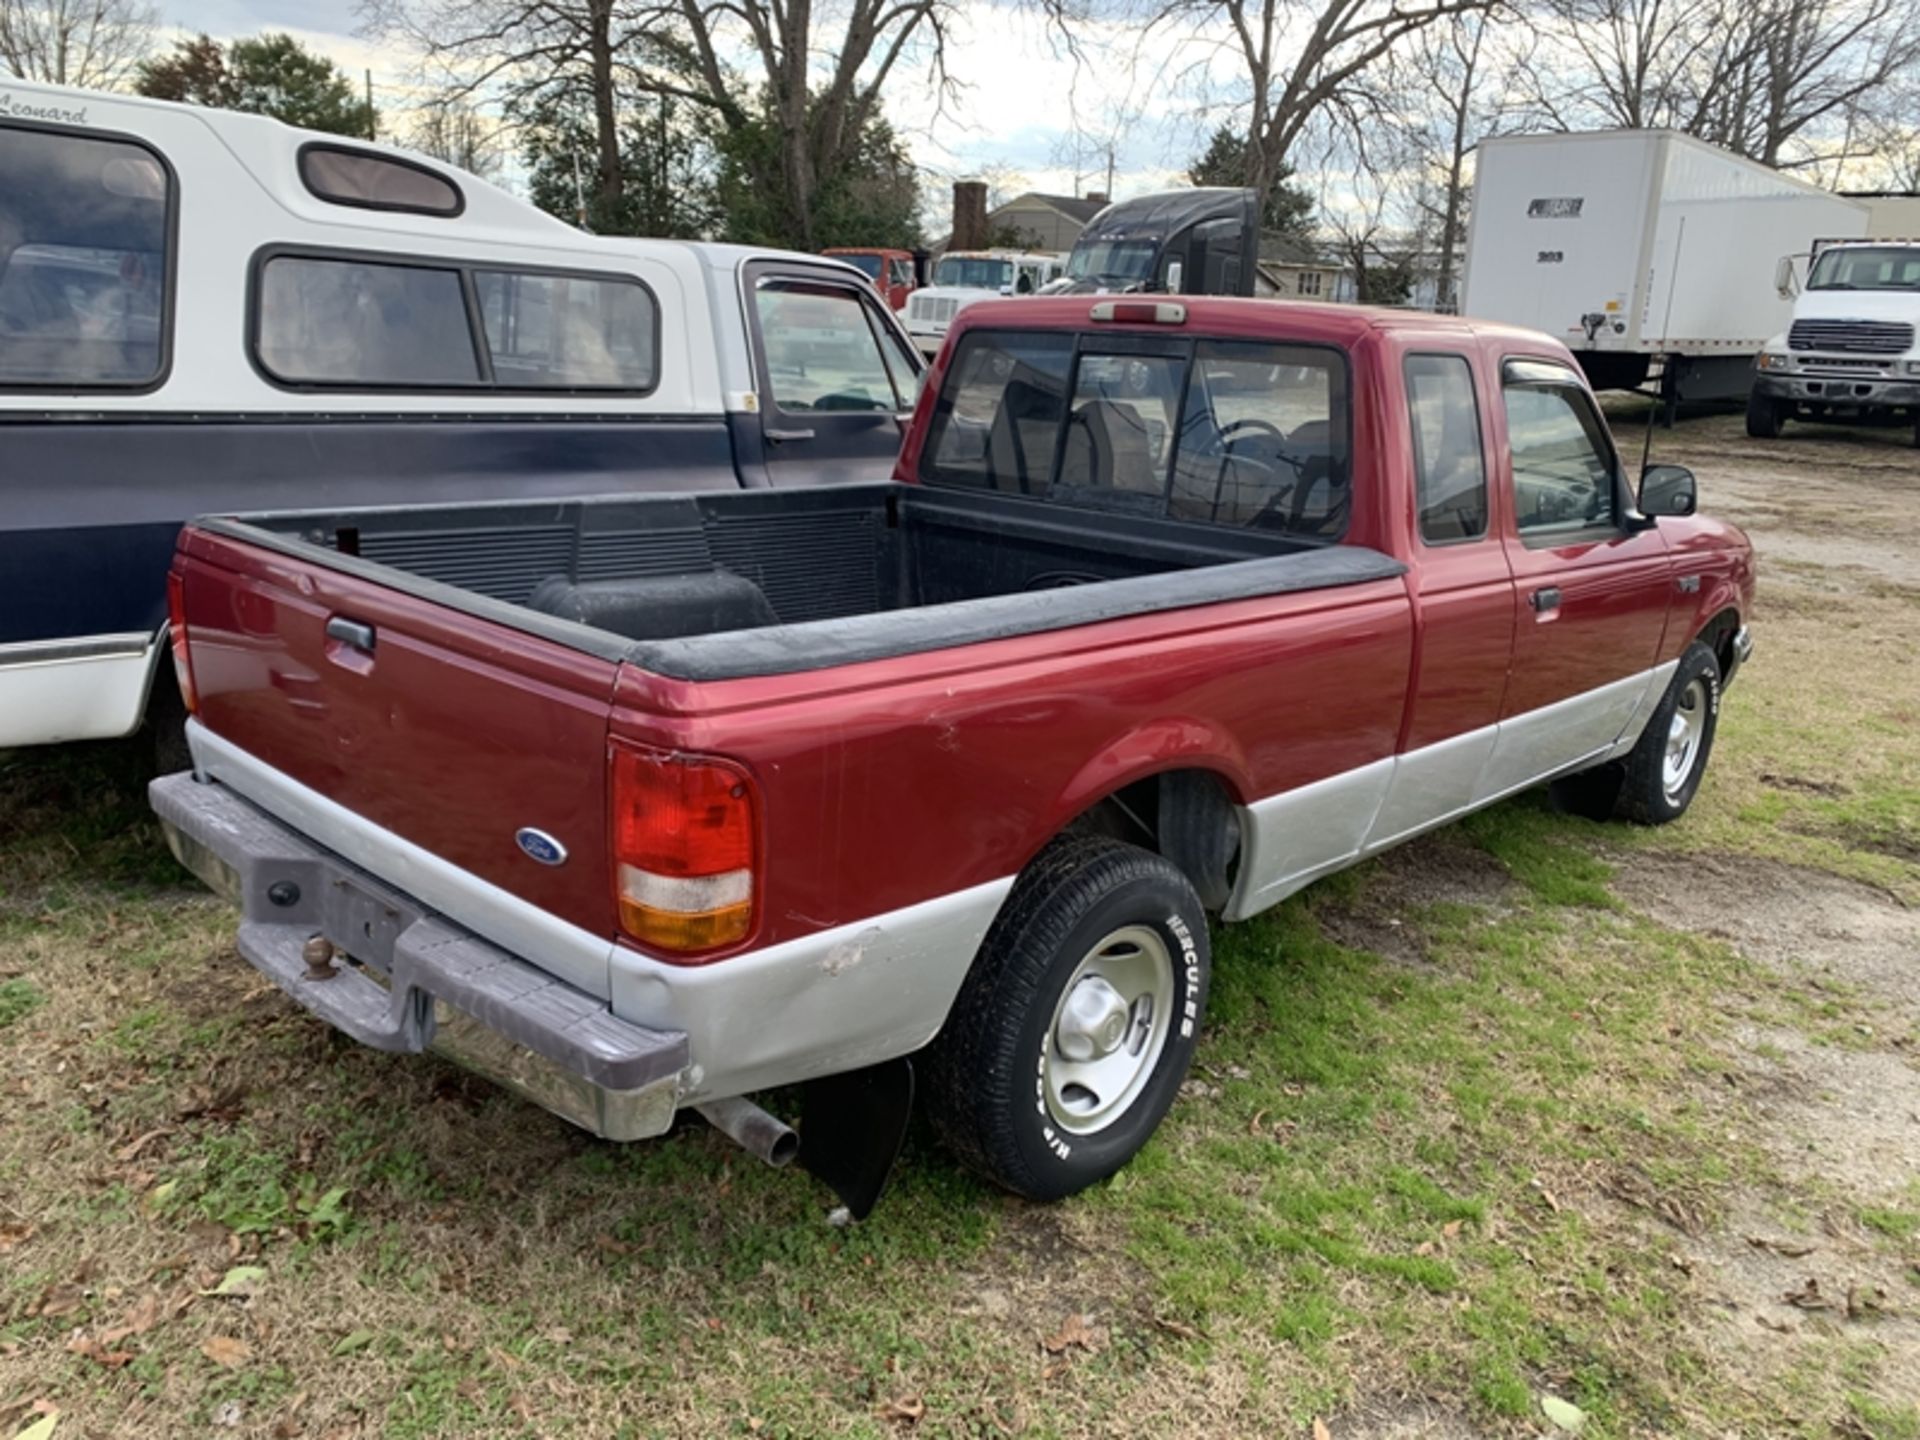 1995 FORD Ranger XLT - 136,915 miles showing - 1FTCR14U1STA06218 - Image 3 of 6